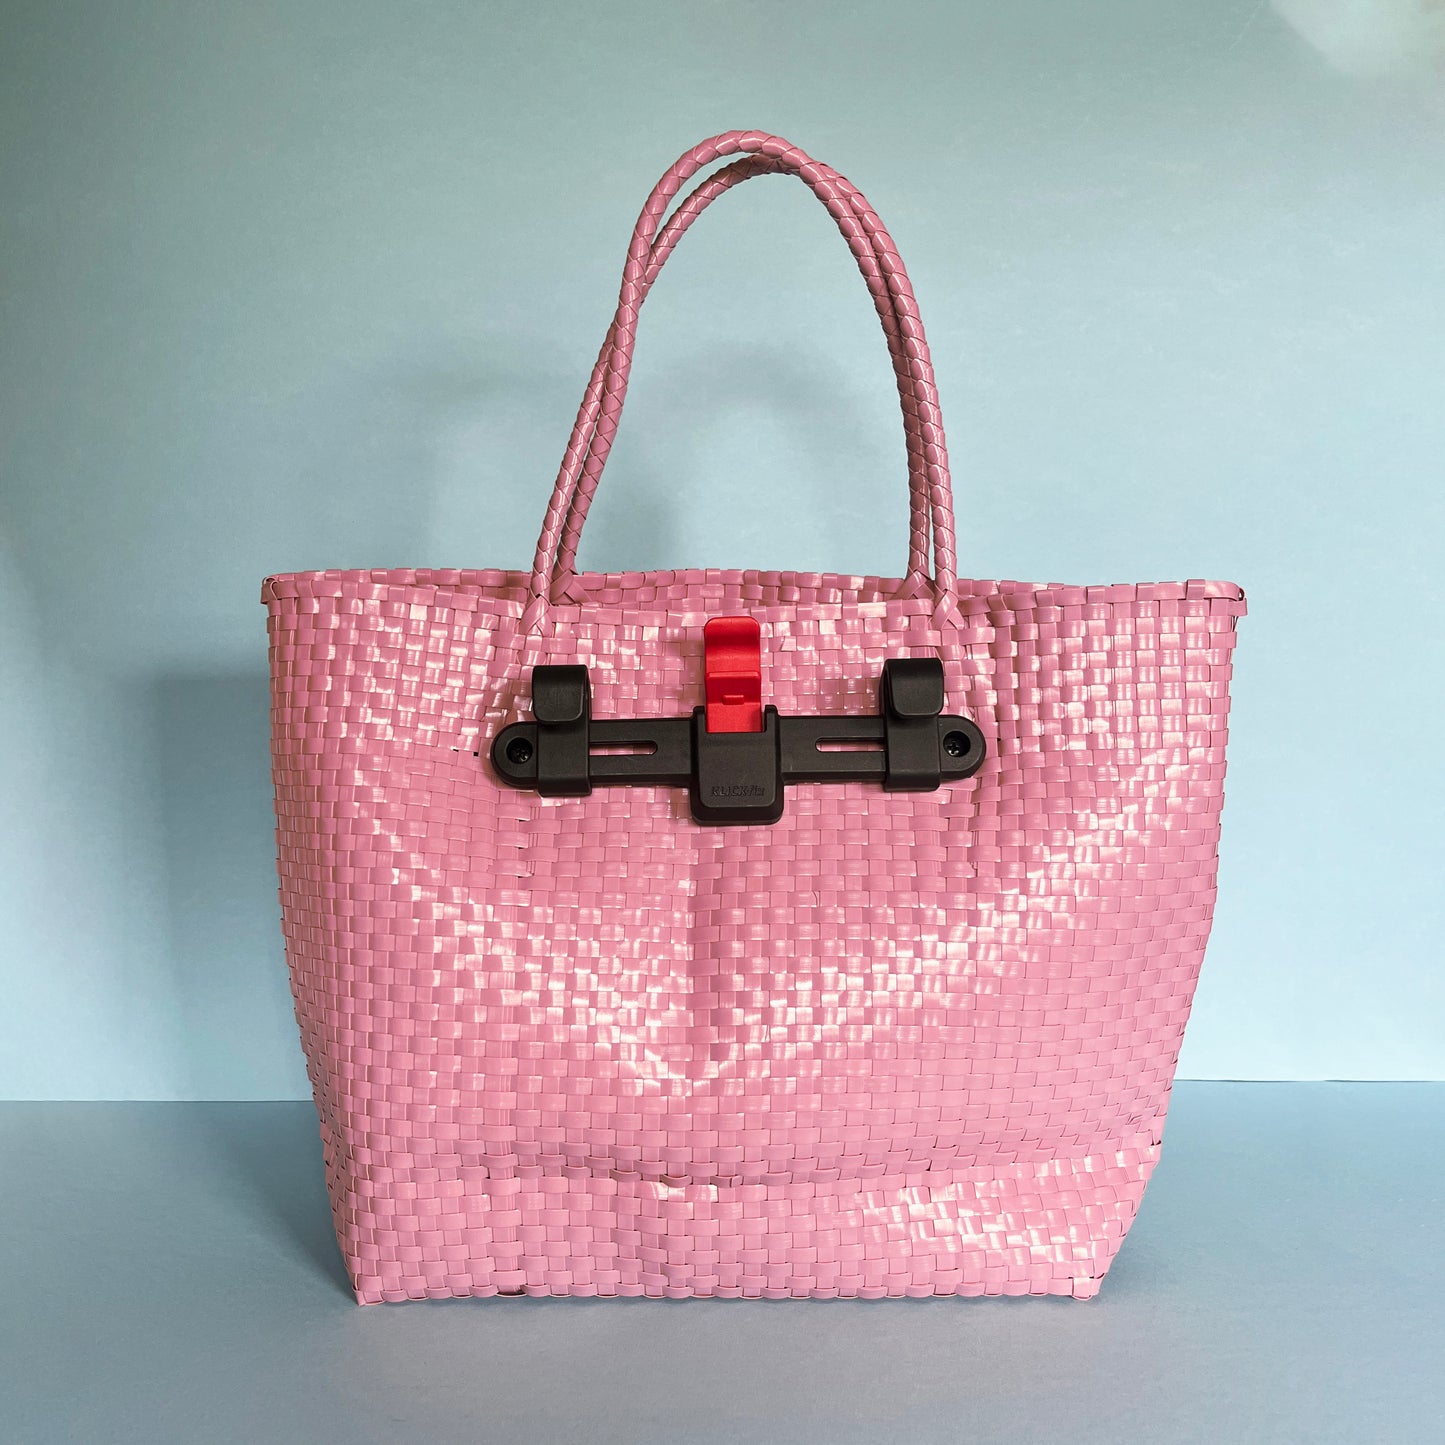 Bicycle Pannier recycled Pink plastic woven basket tote bag with toggle closure